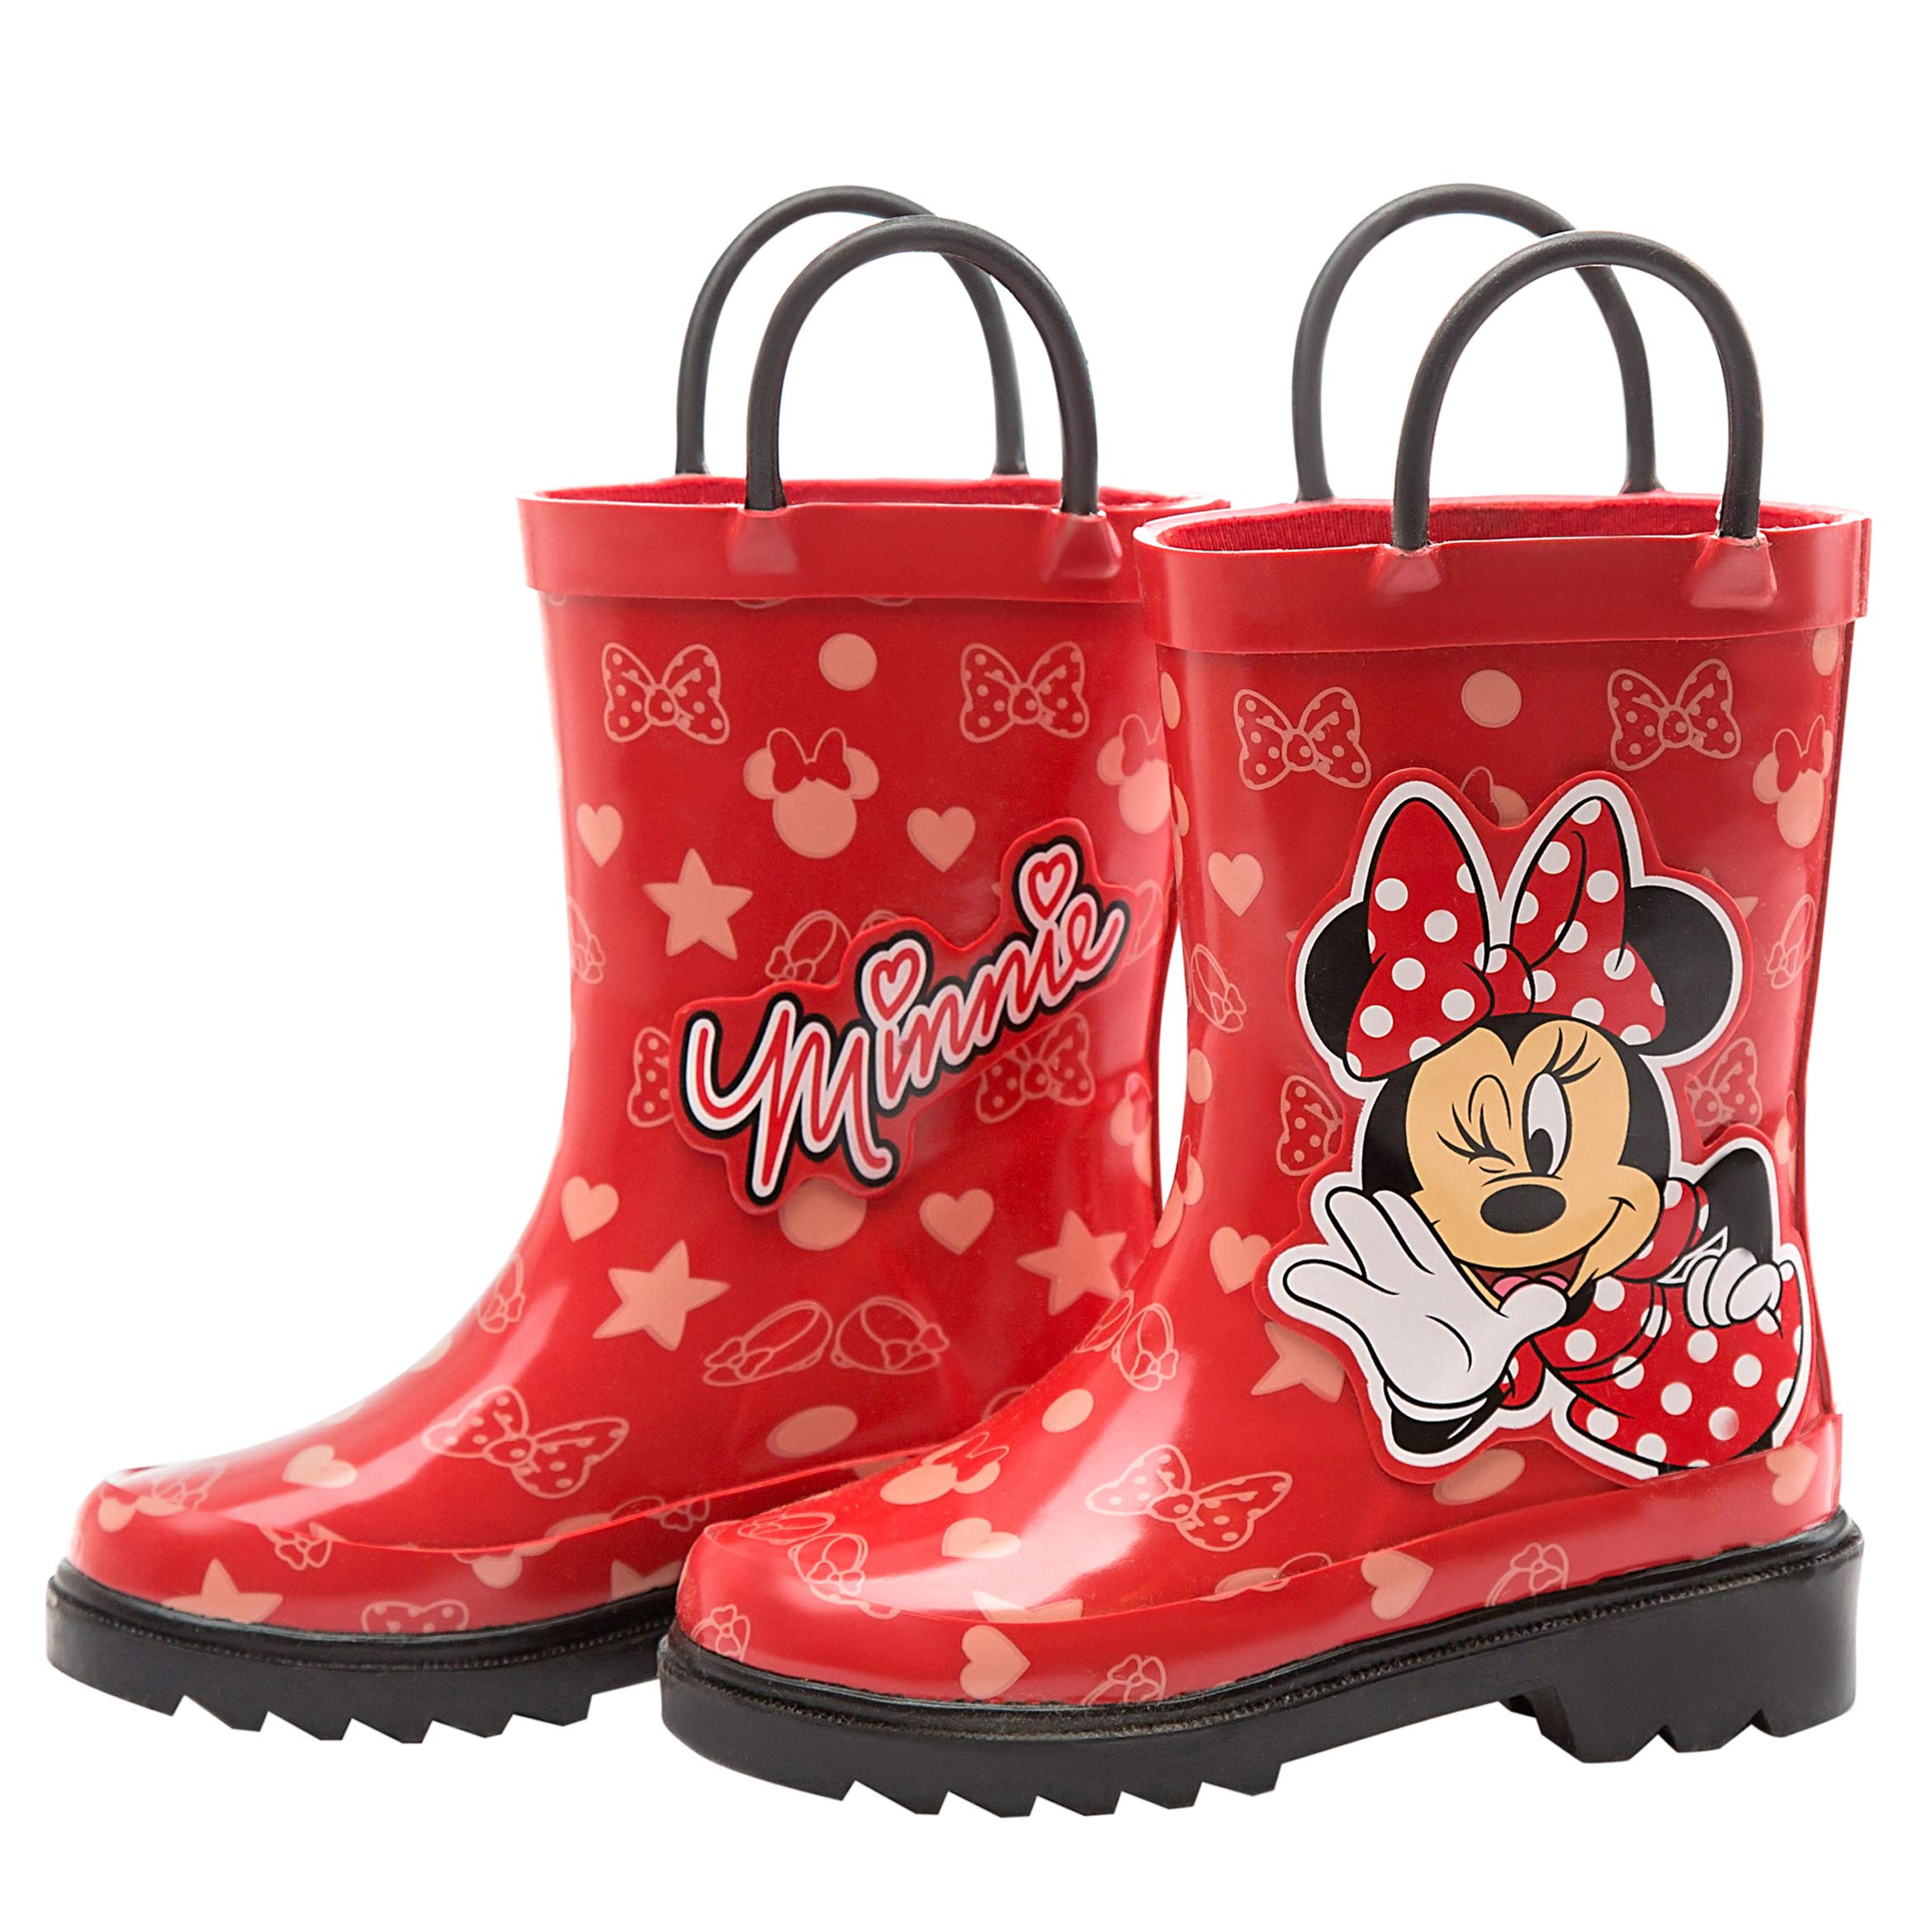 Disney Minnie Mouse and Mickey Mouse Rubber Rainboots - Waterproof - Easy-on - Toddler and Little Kids Sizes - Boys, Girls